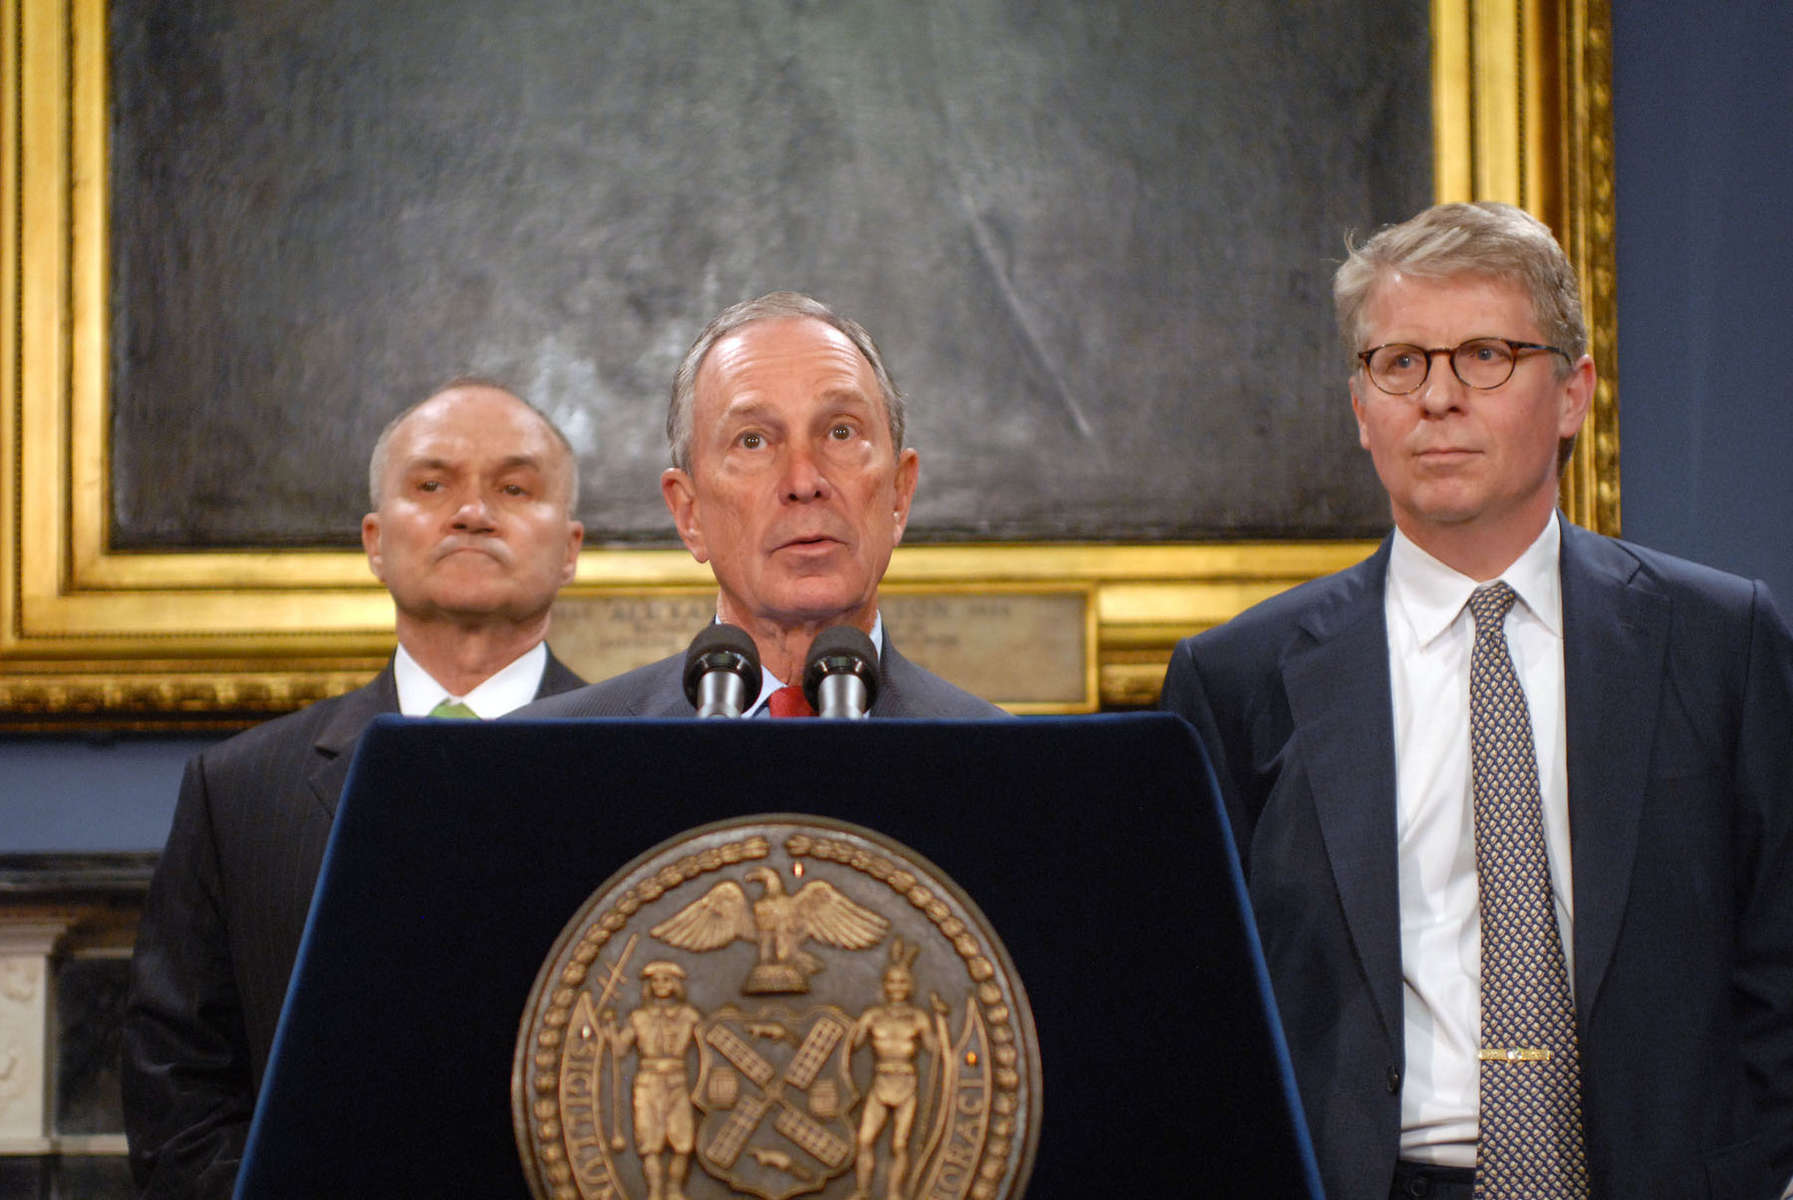 Mayor Michael R. Bloomberg, center, announces arrests in terror cases at a press conference at City Hall Thursday May 12, 2013.Left is NYC Police Commissioner Raymond W. Kelly. at right is Manhattan District Attorney Cyrus R. Vance Jr. 